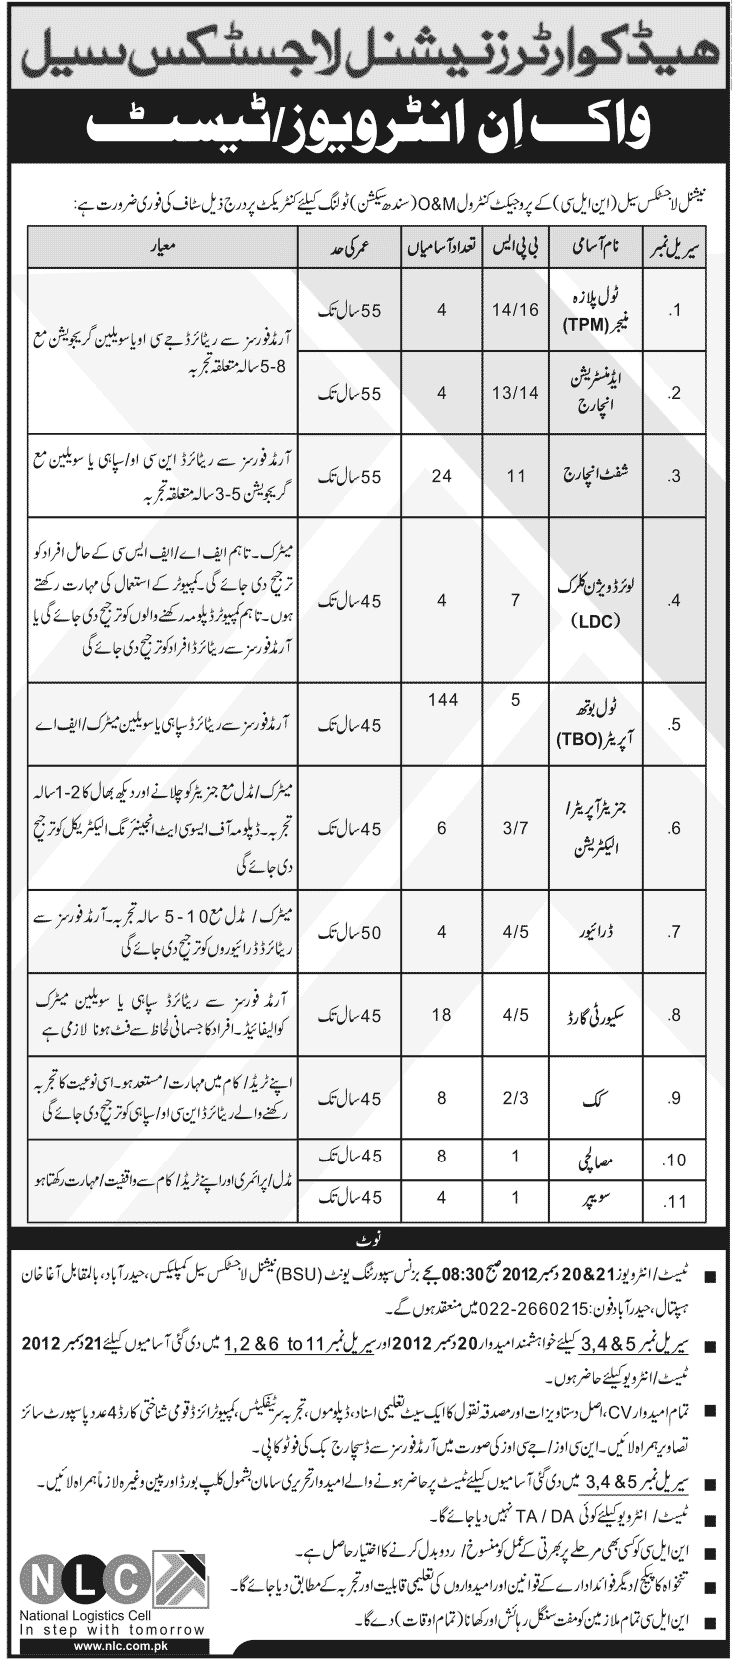 National Logistics Cell Jobs 2012 O&M Control Sindh Section Tolling Walk in Interviews